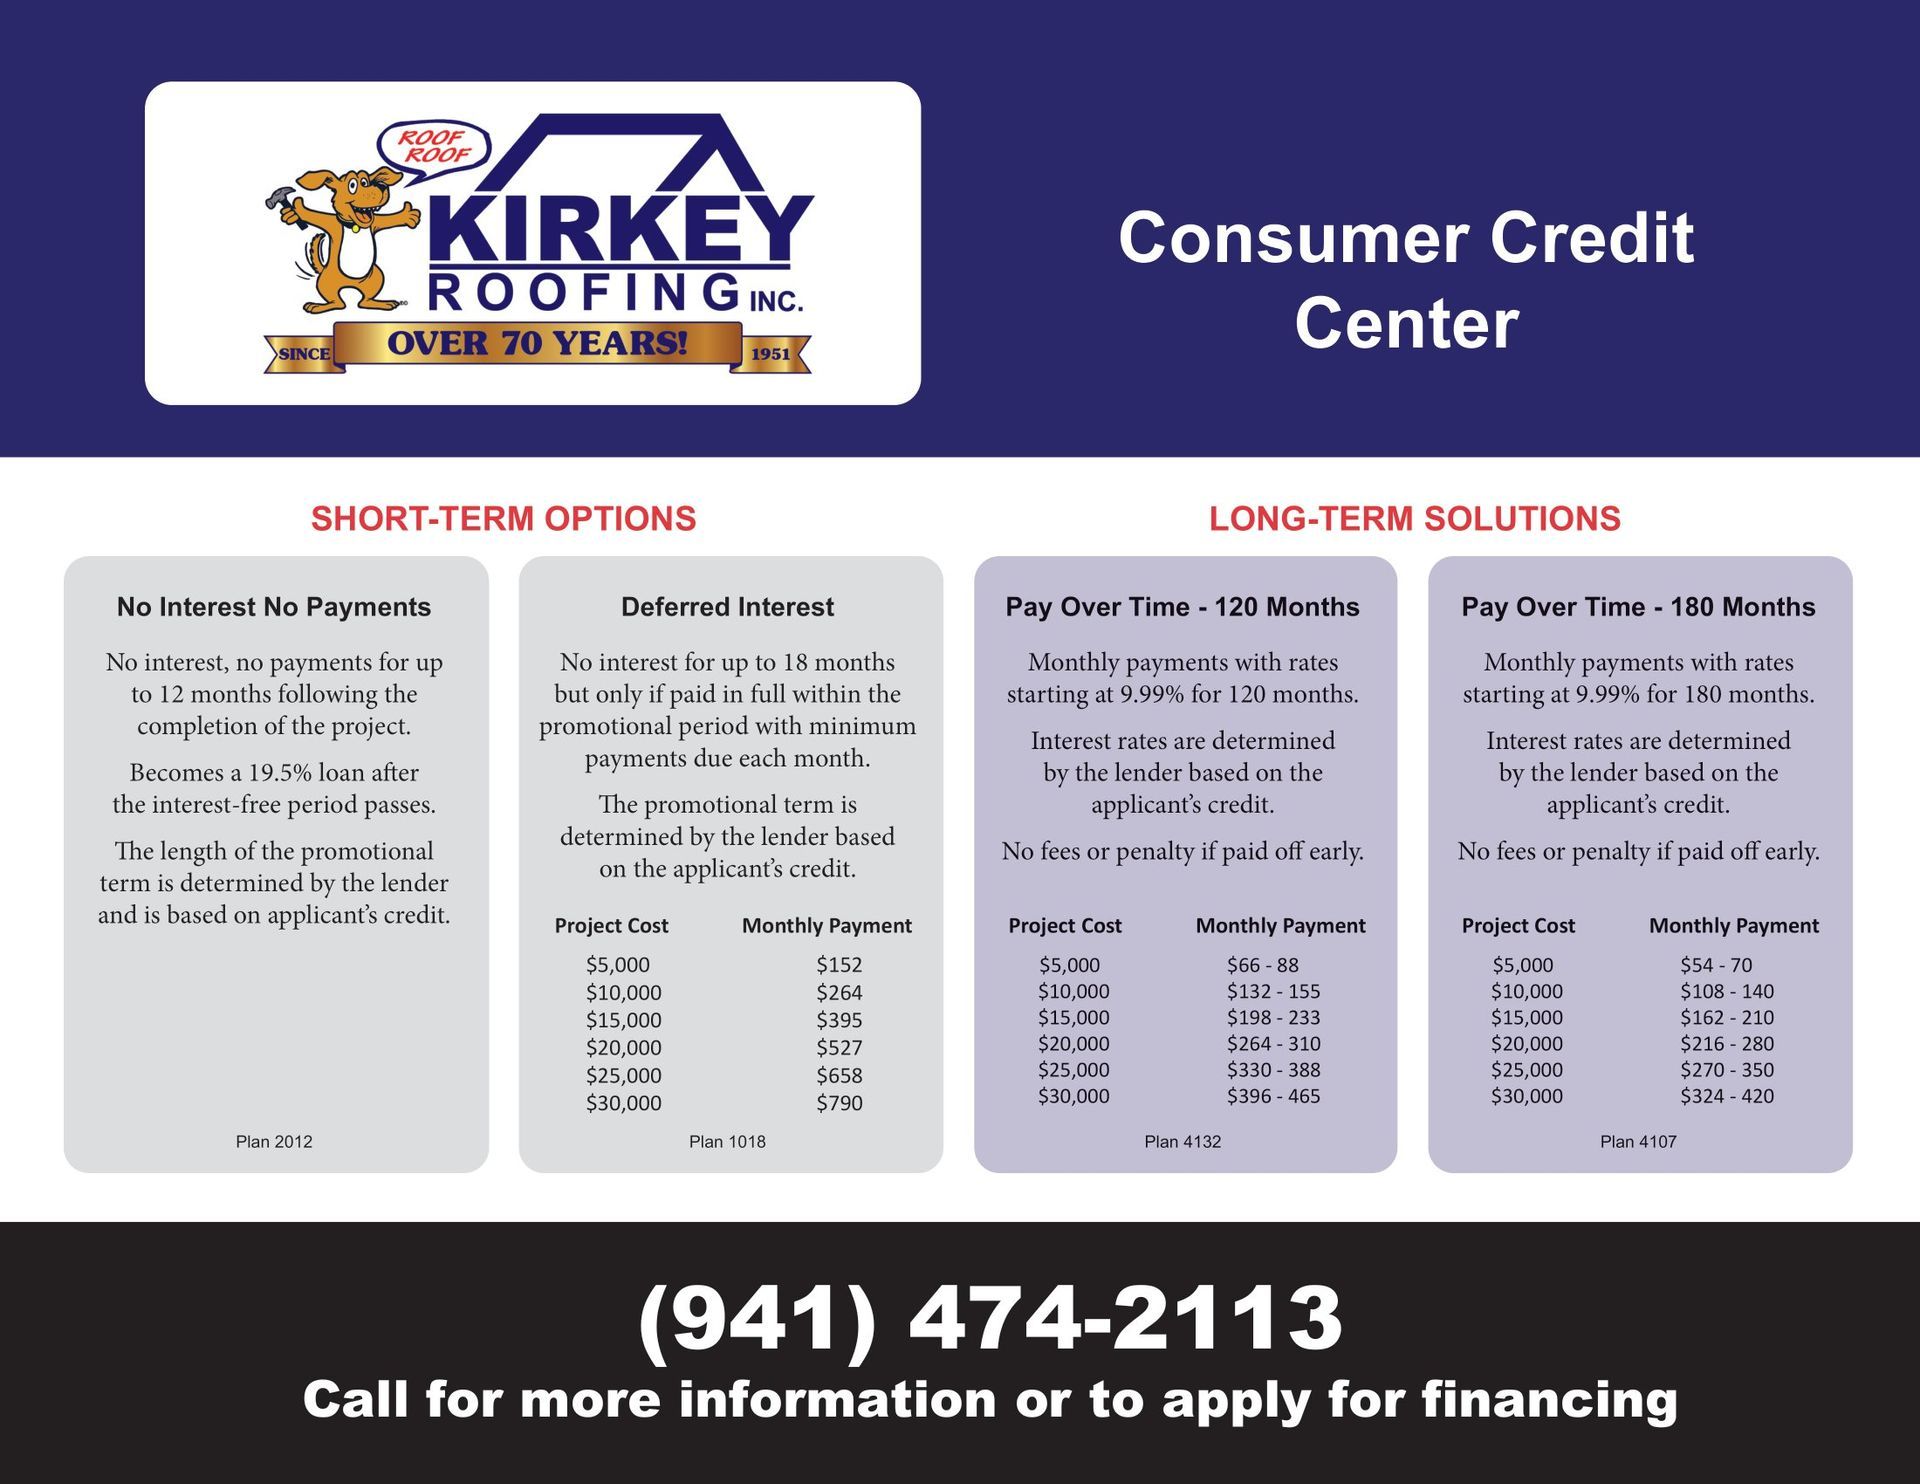 a flyer for kirky roofing says consumer credit center